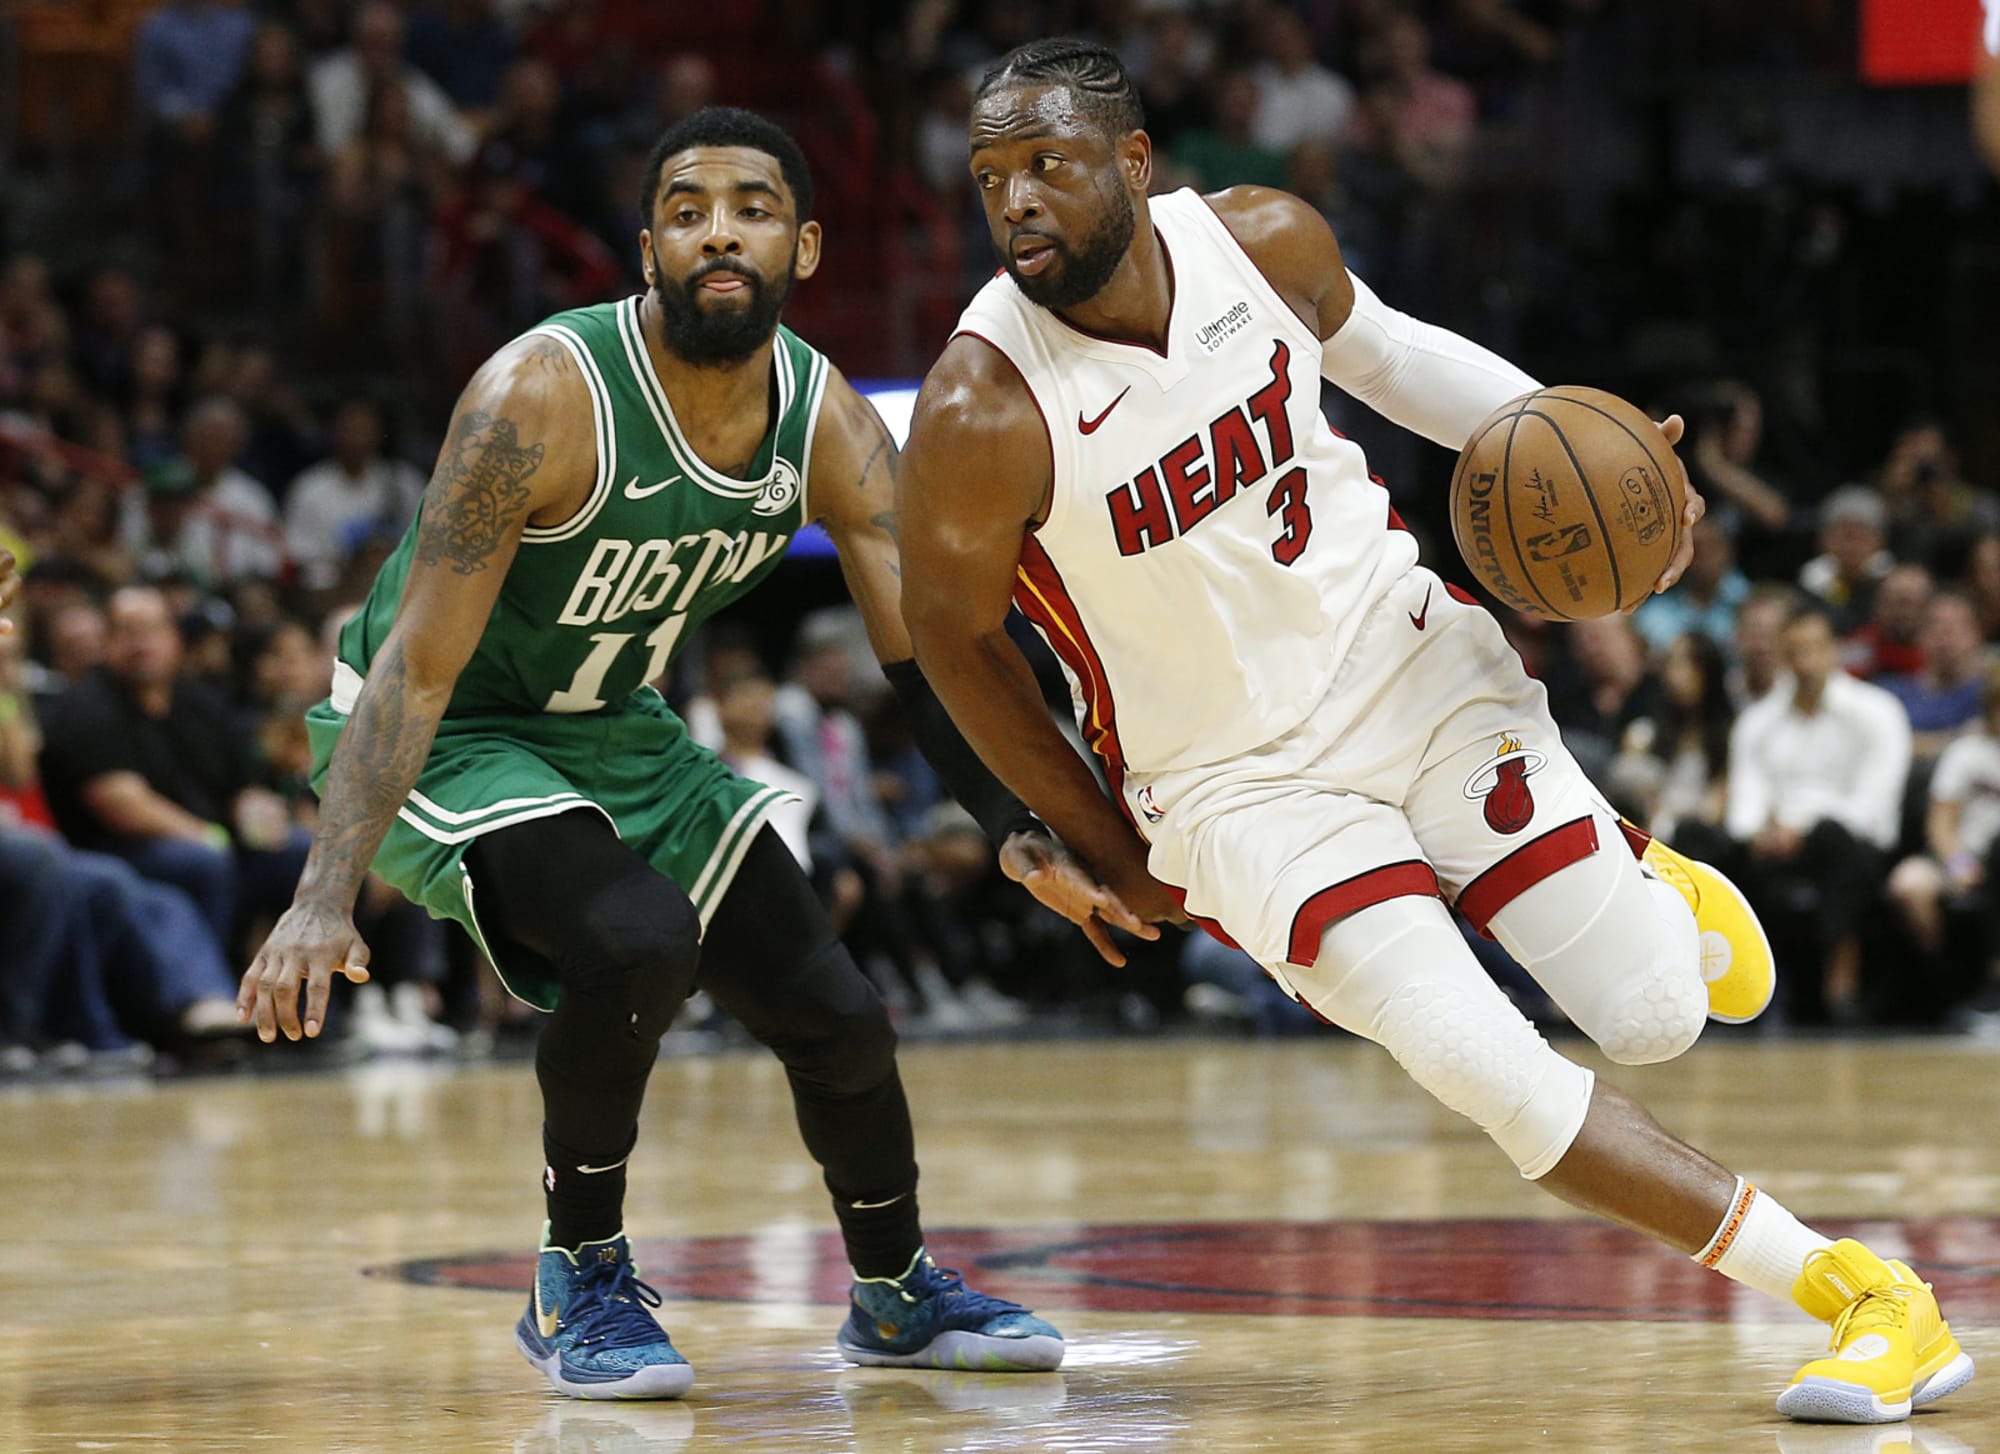 Miami Heat: Could they somehow land Kyrie Irving?